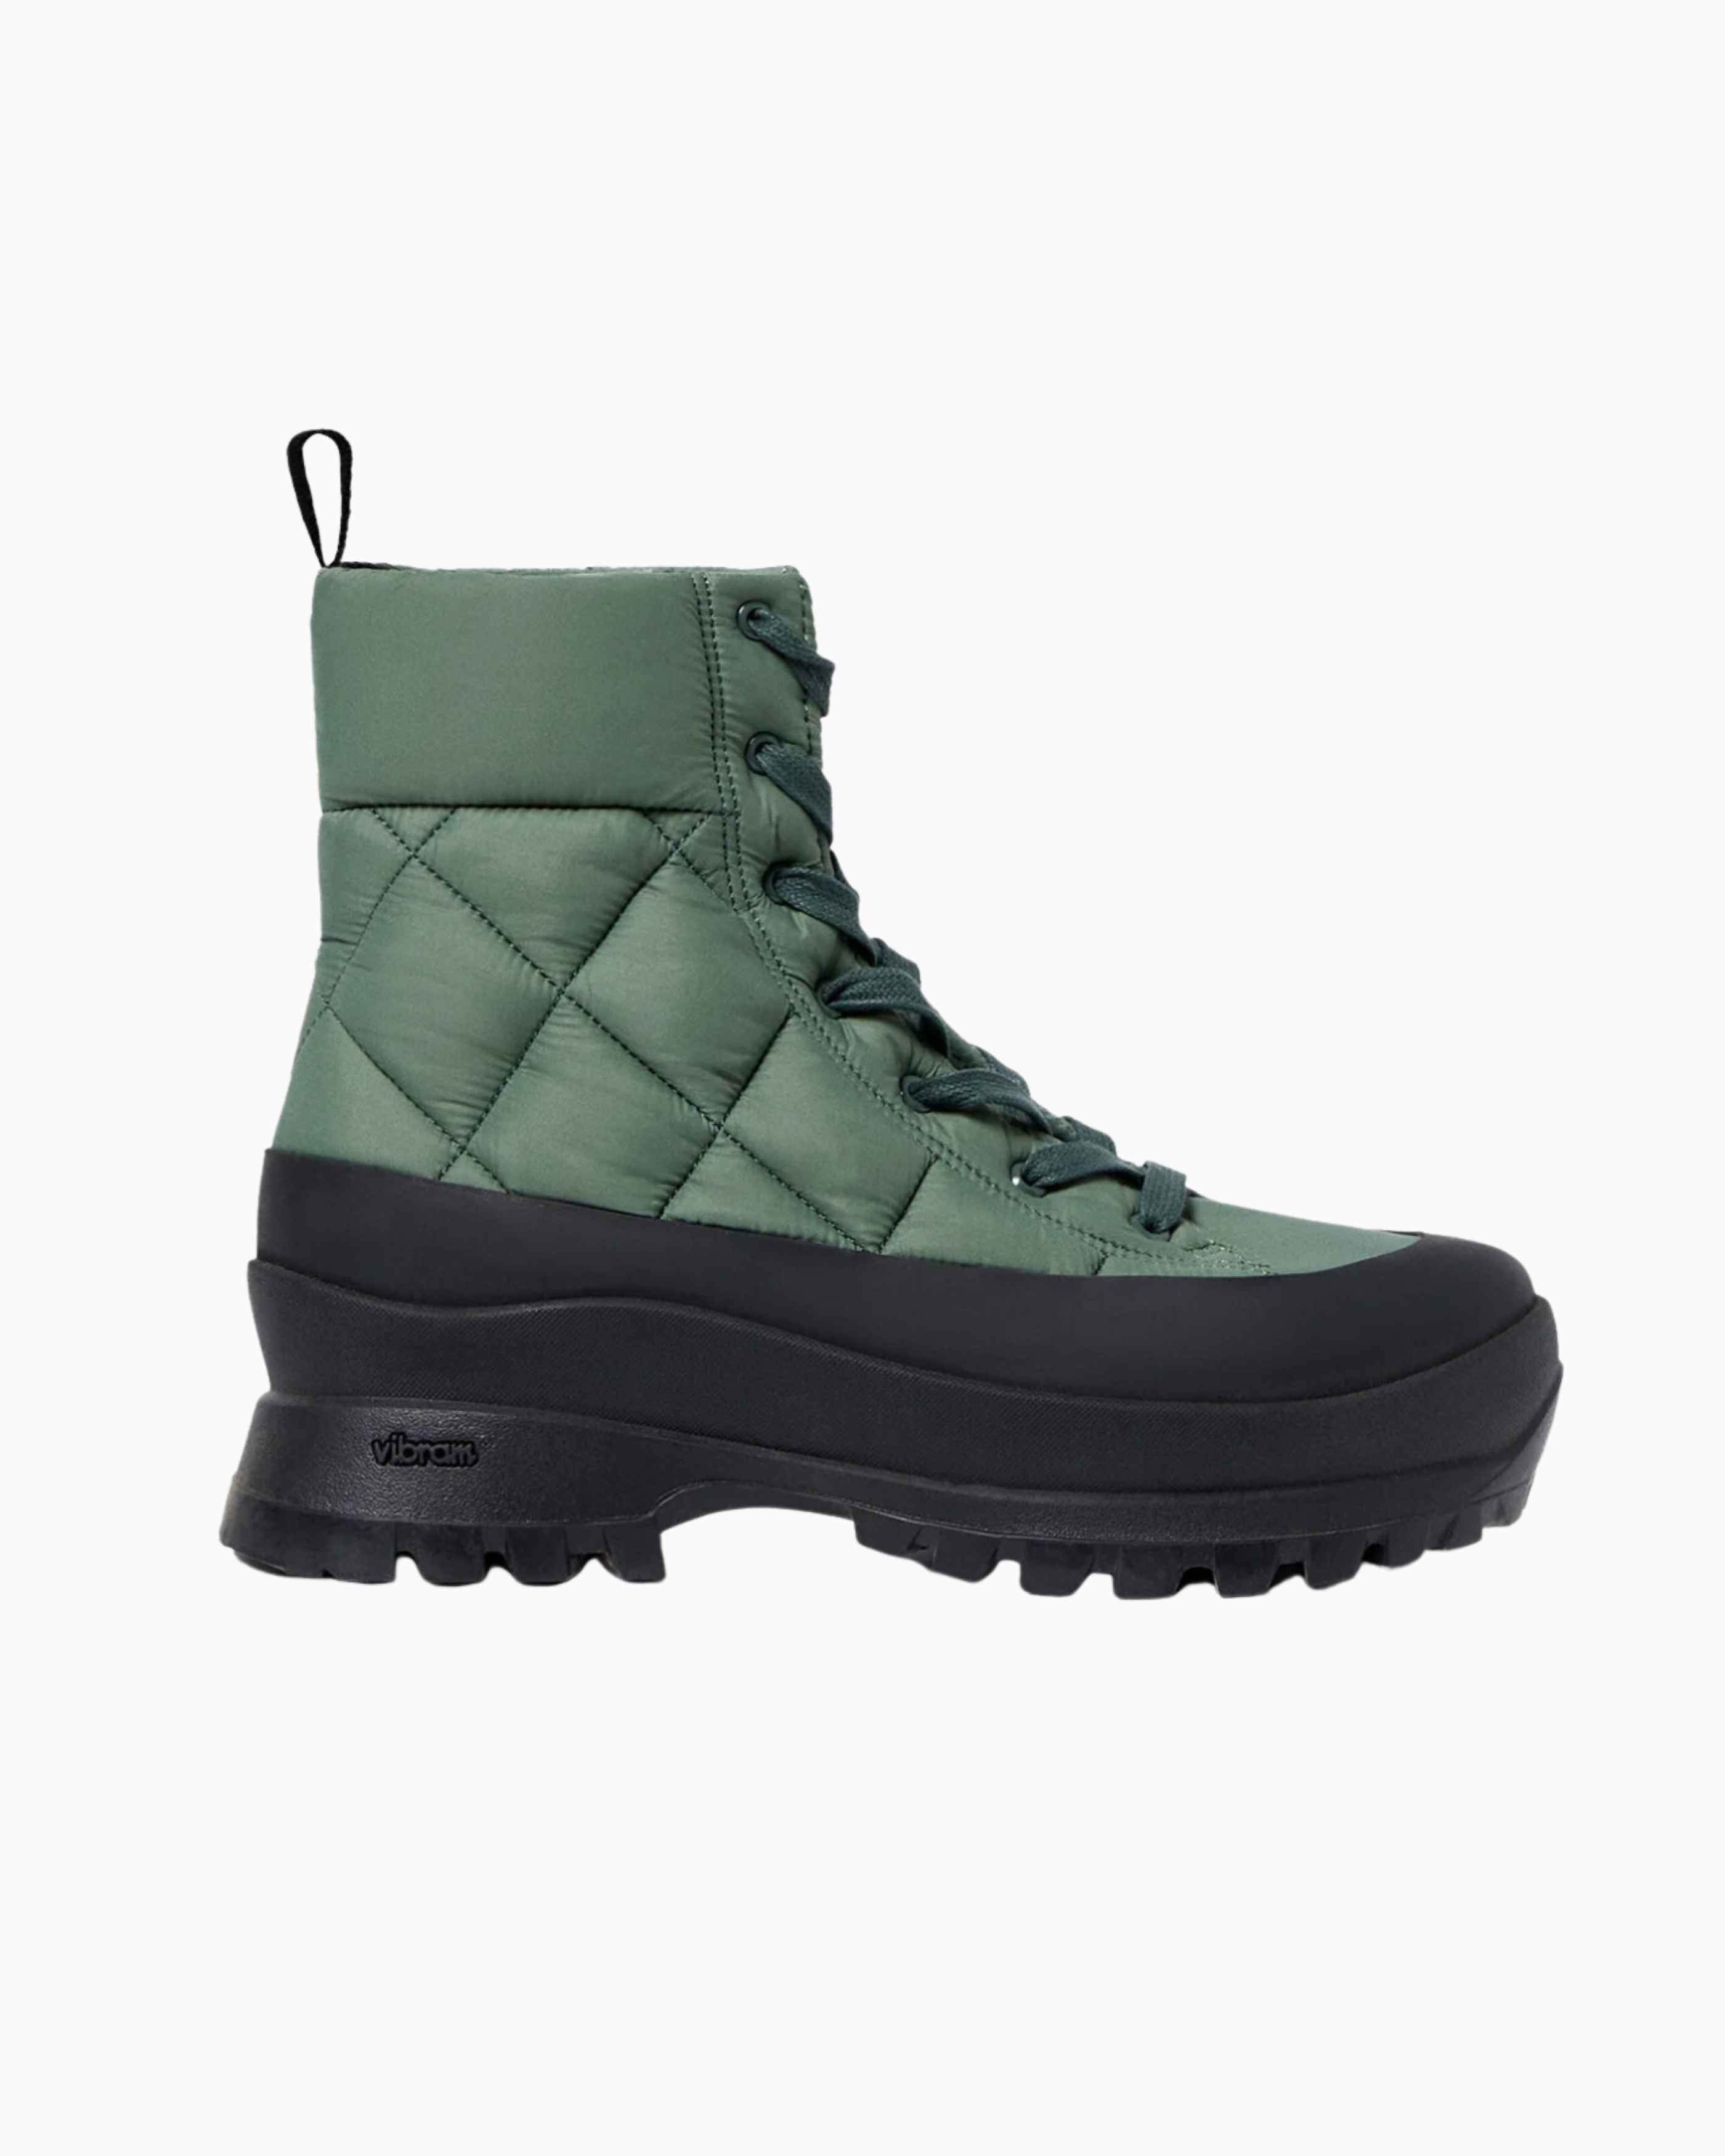 Loeffler Randall Davey Puffy Quilted Lace Up Boot in Dark Green